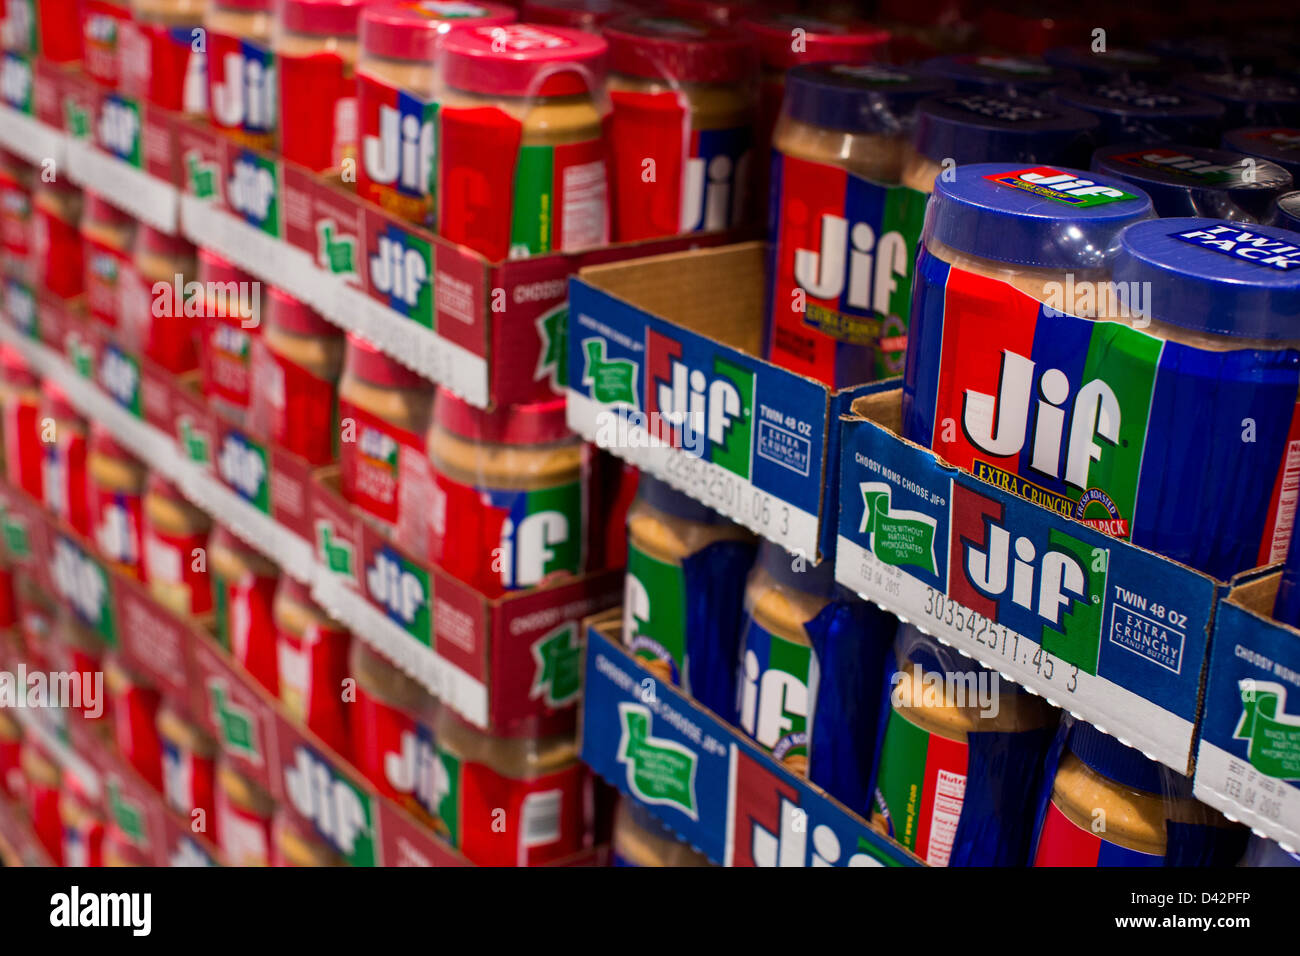 Jif peanut butter on display at a Costco Wholesale Warehouse Club. Stock Photo